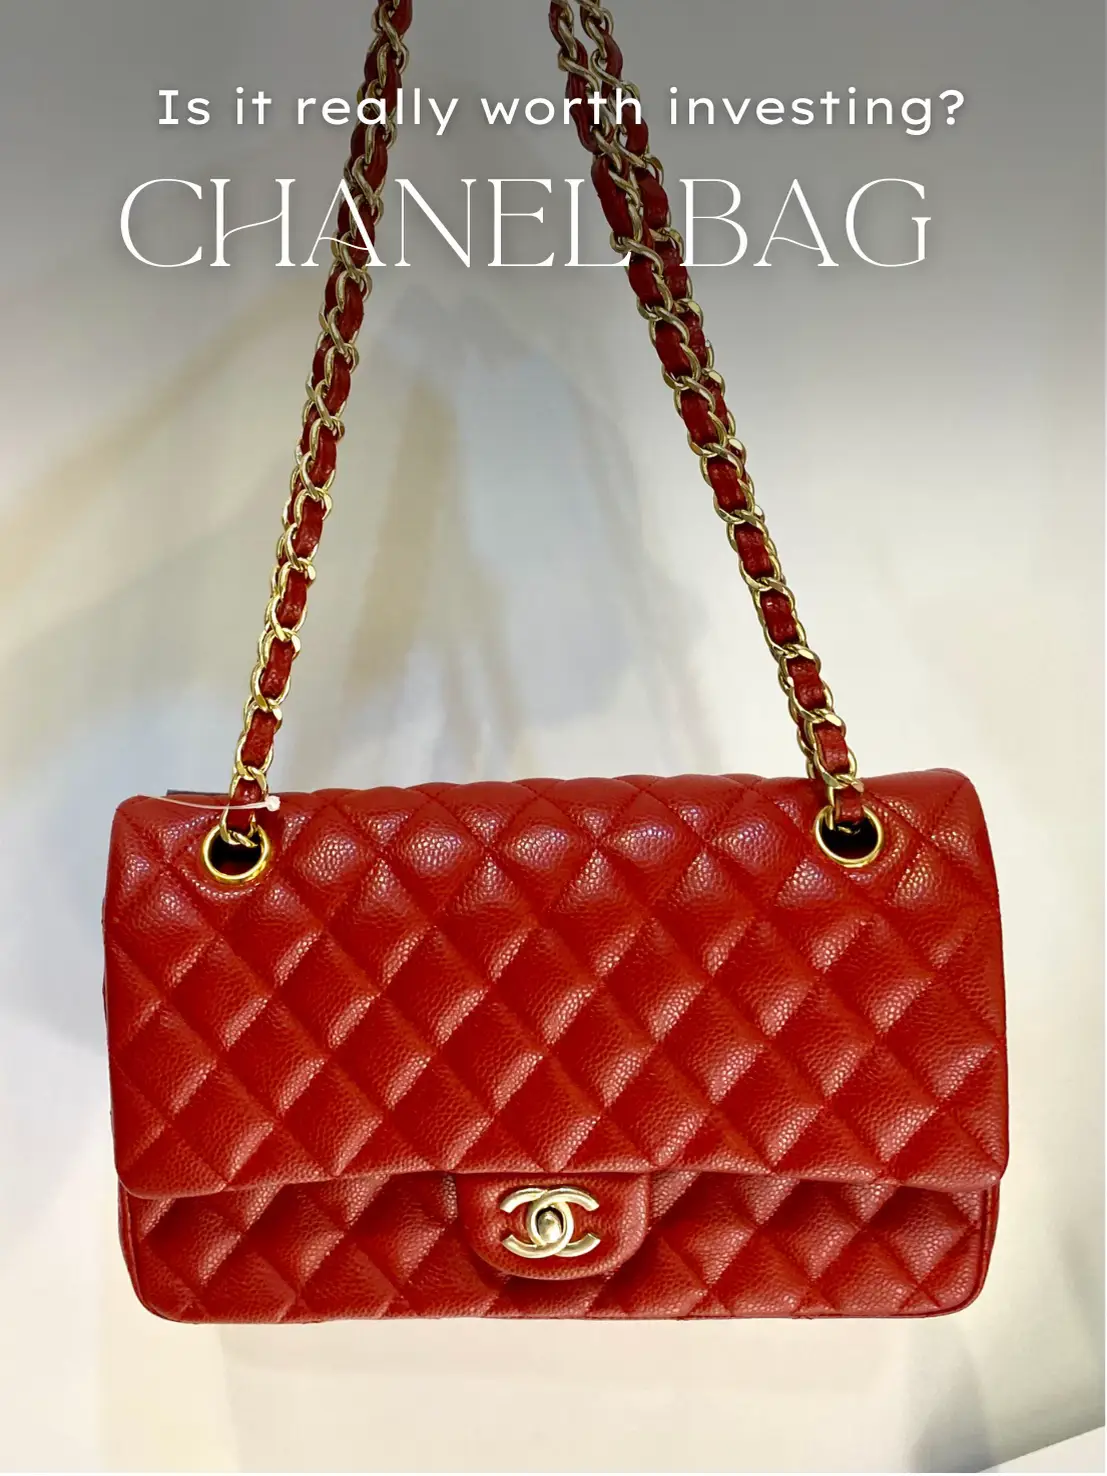 Chanel? Really?